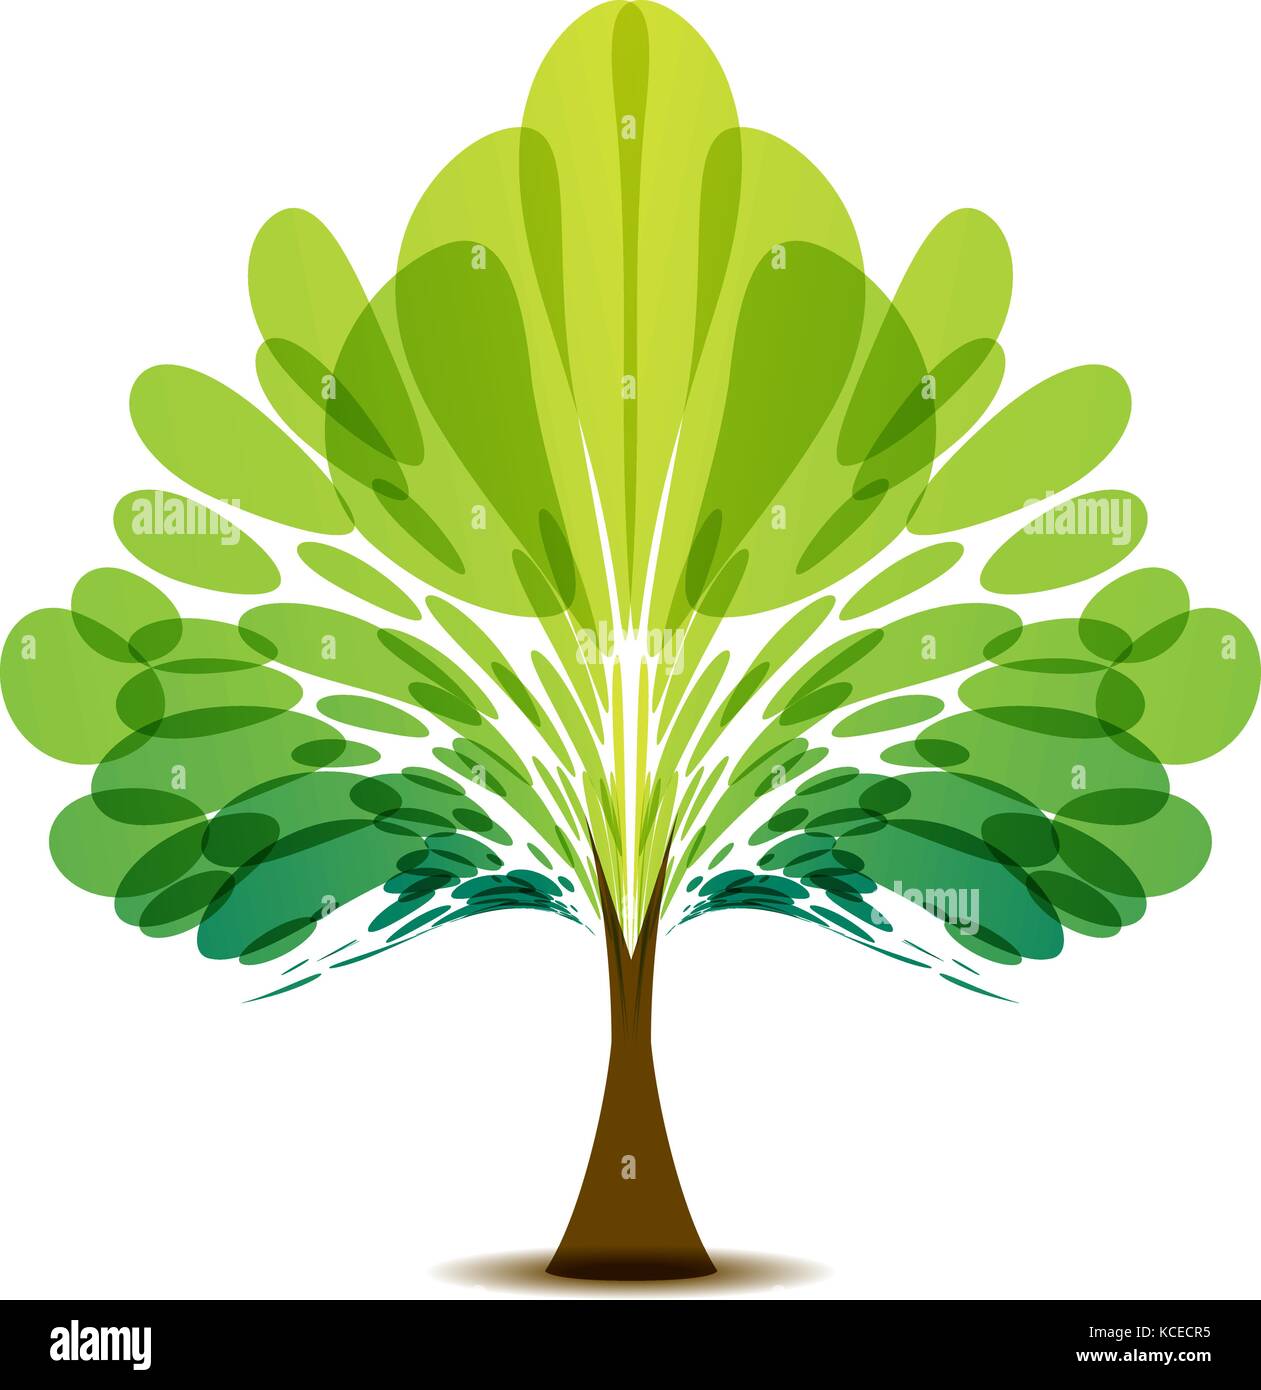 Stylized vector tree logo design with green leaves on white background Stock Vector